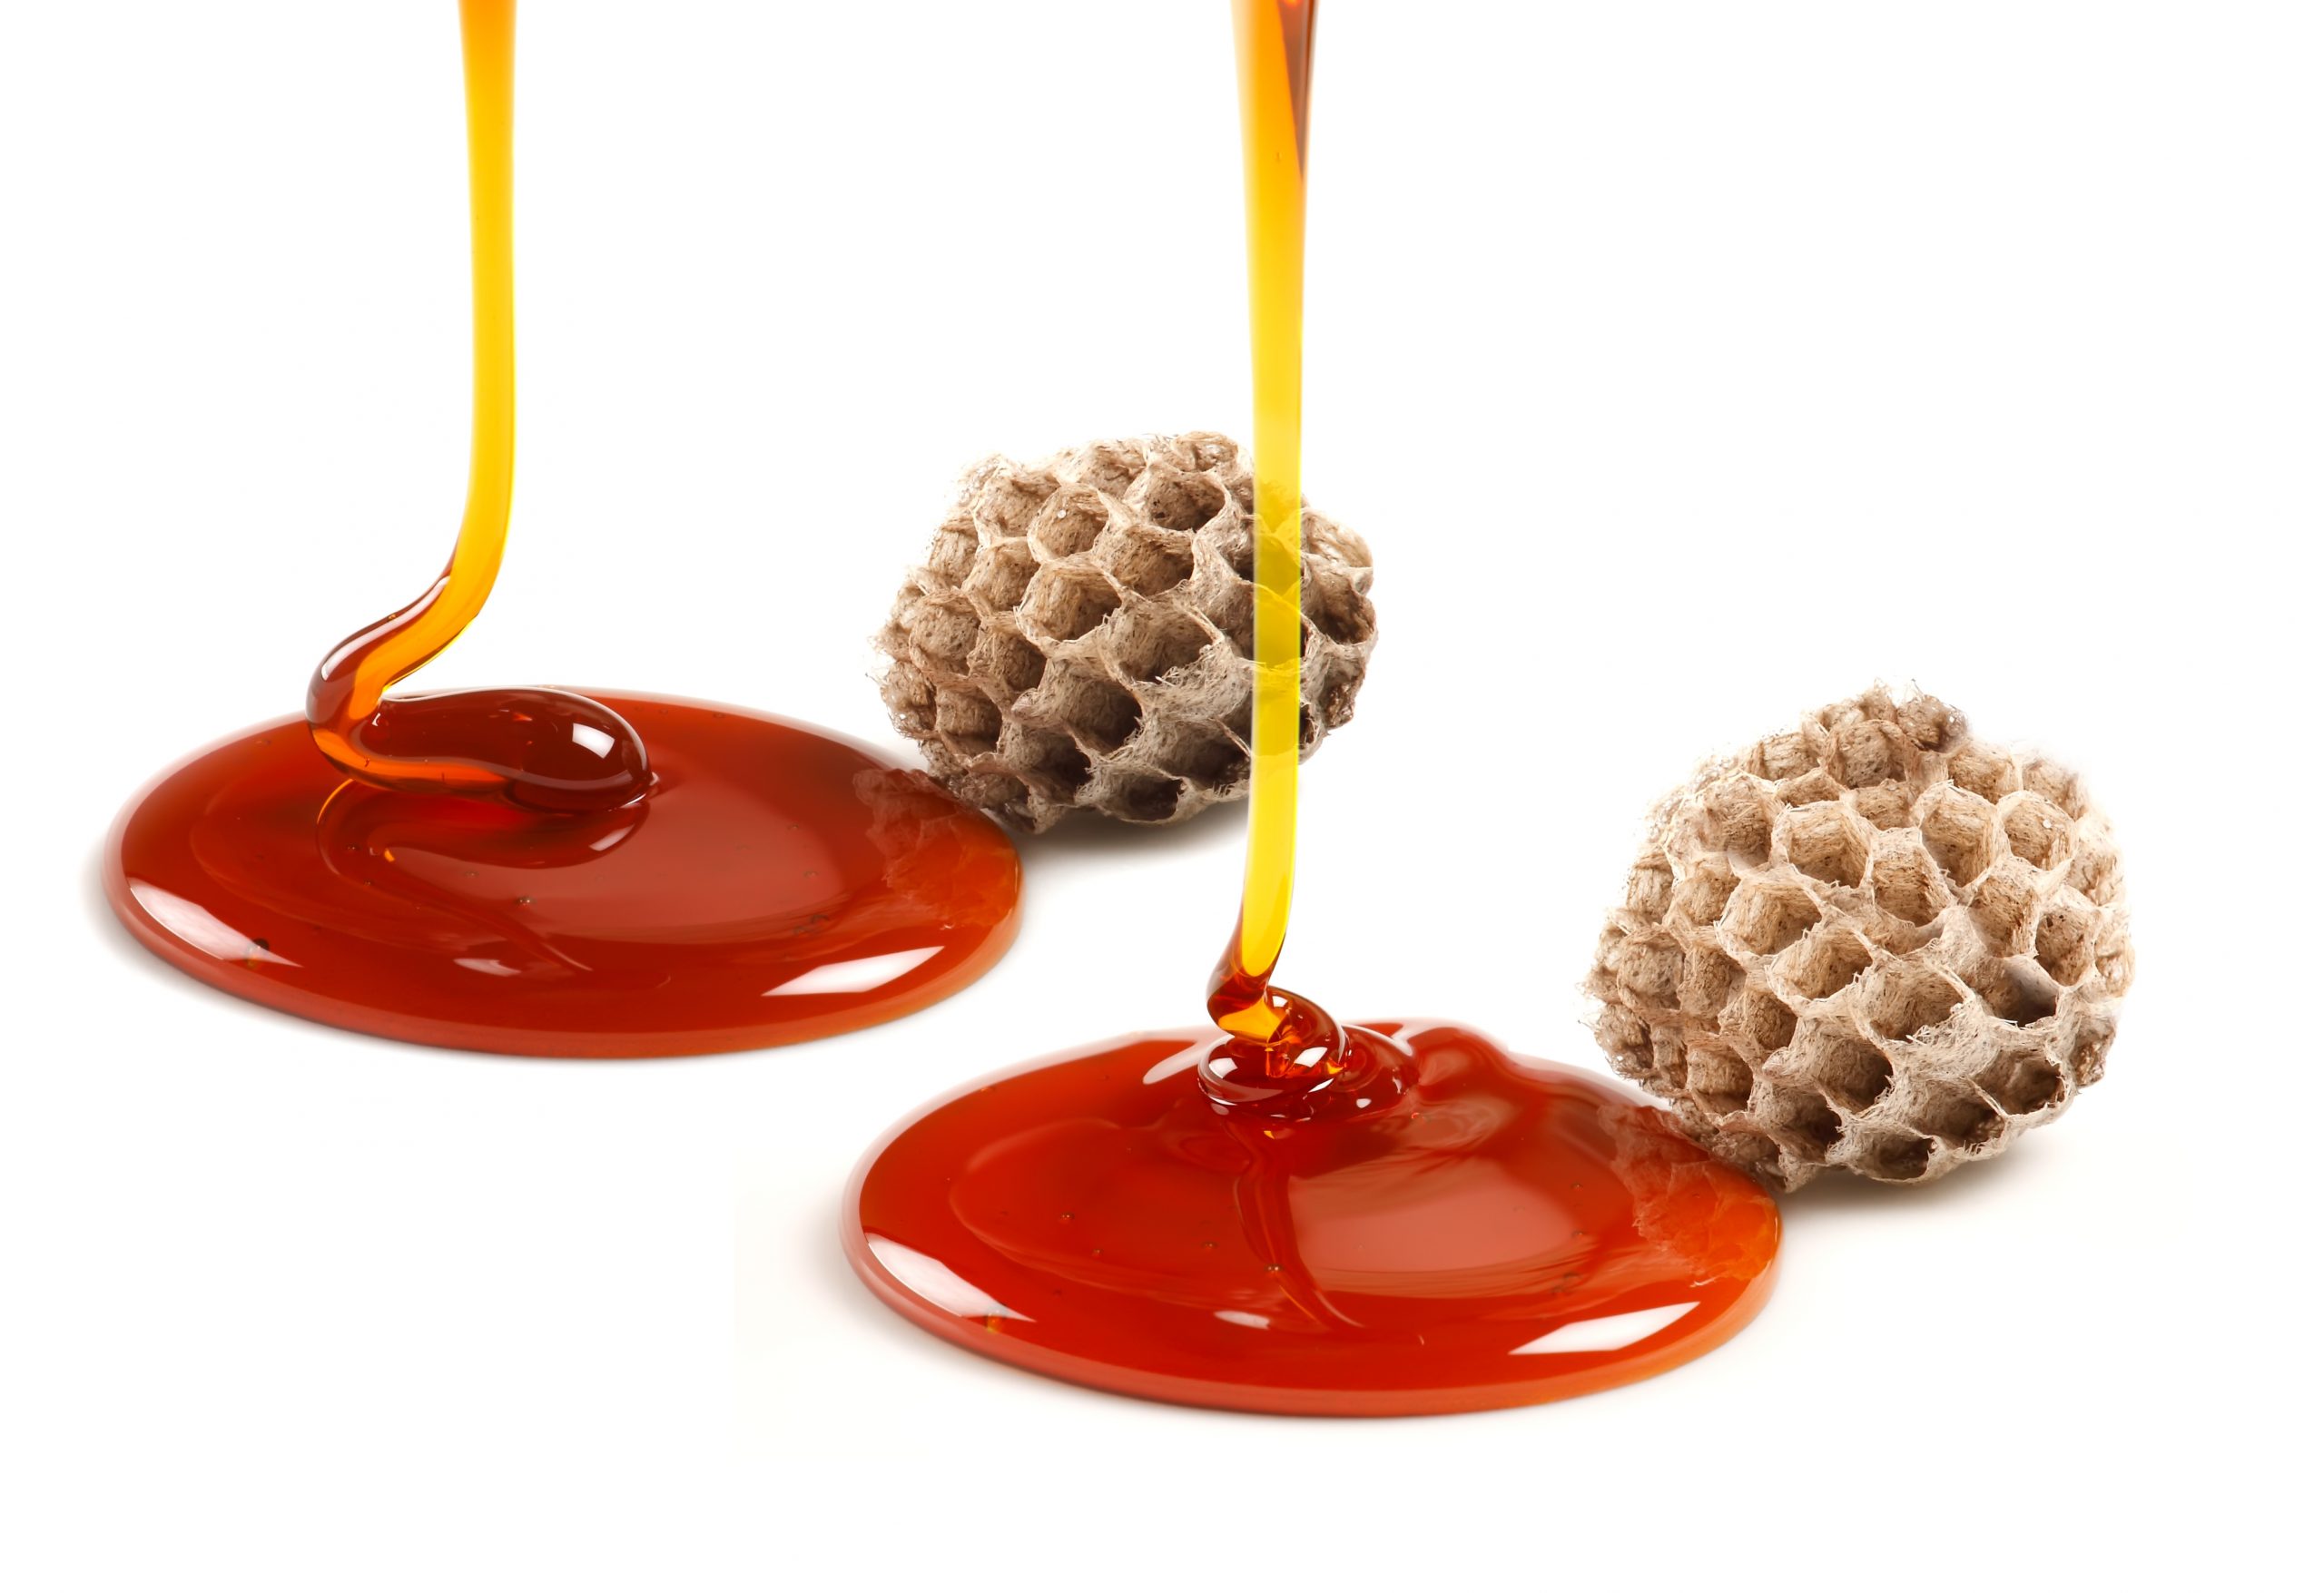 Products Originating from Honey Bees